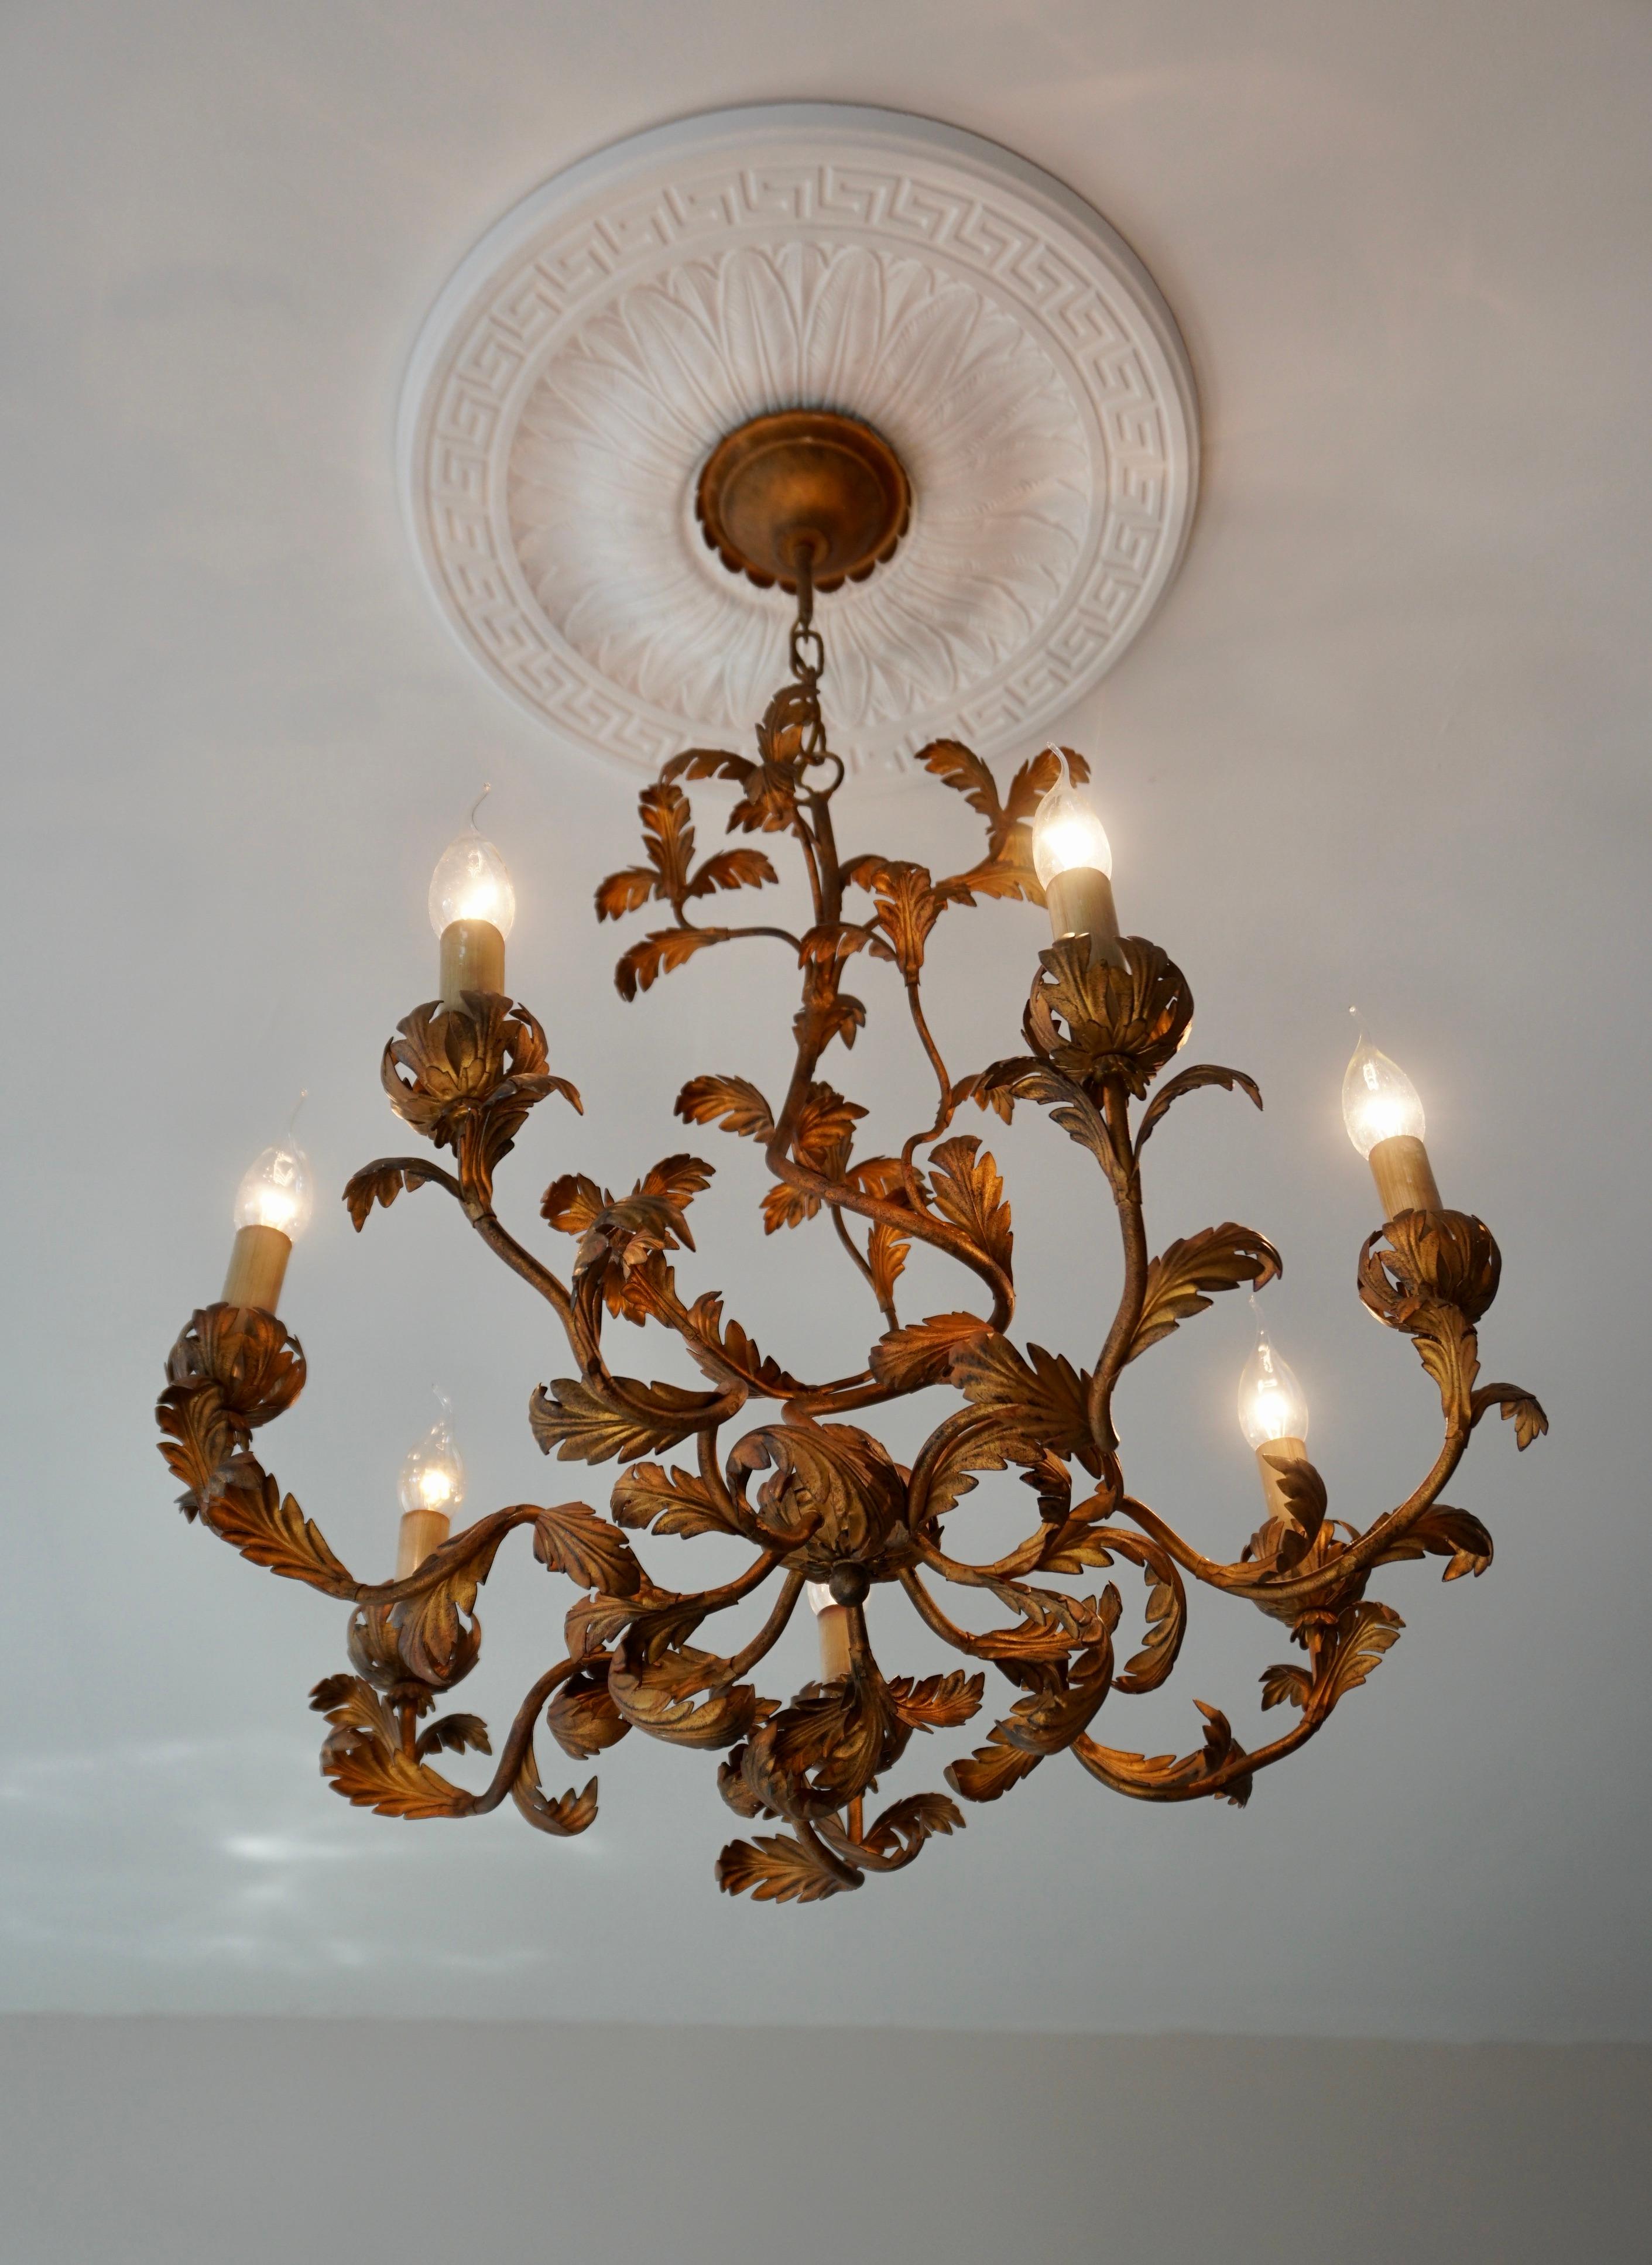 Impressive large mid century gilt tole chandelier, finely made with gilt metal leaves with six lights. Very good vintage condition with minimal signs of age and use.

A Hollywood Regency style six-light gilt metal chandelier with tôle palm fronds.